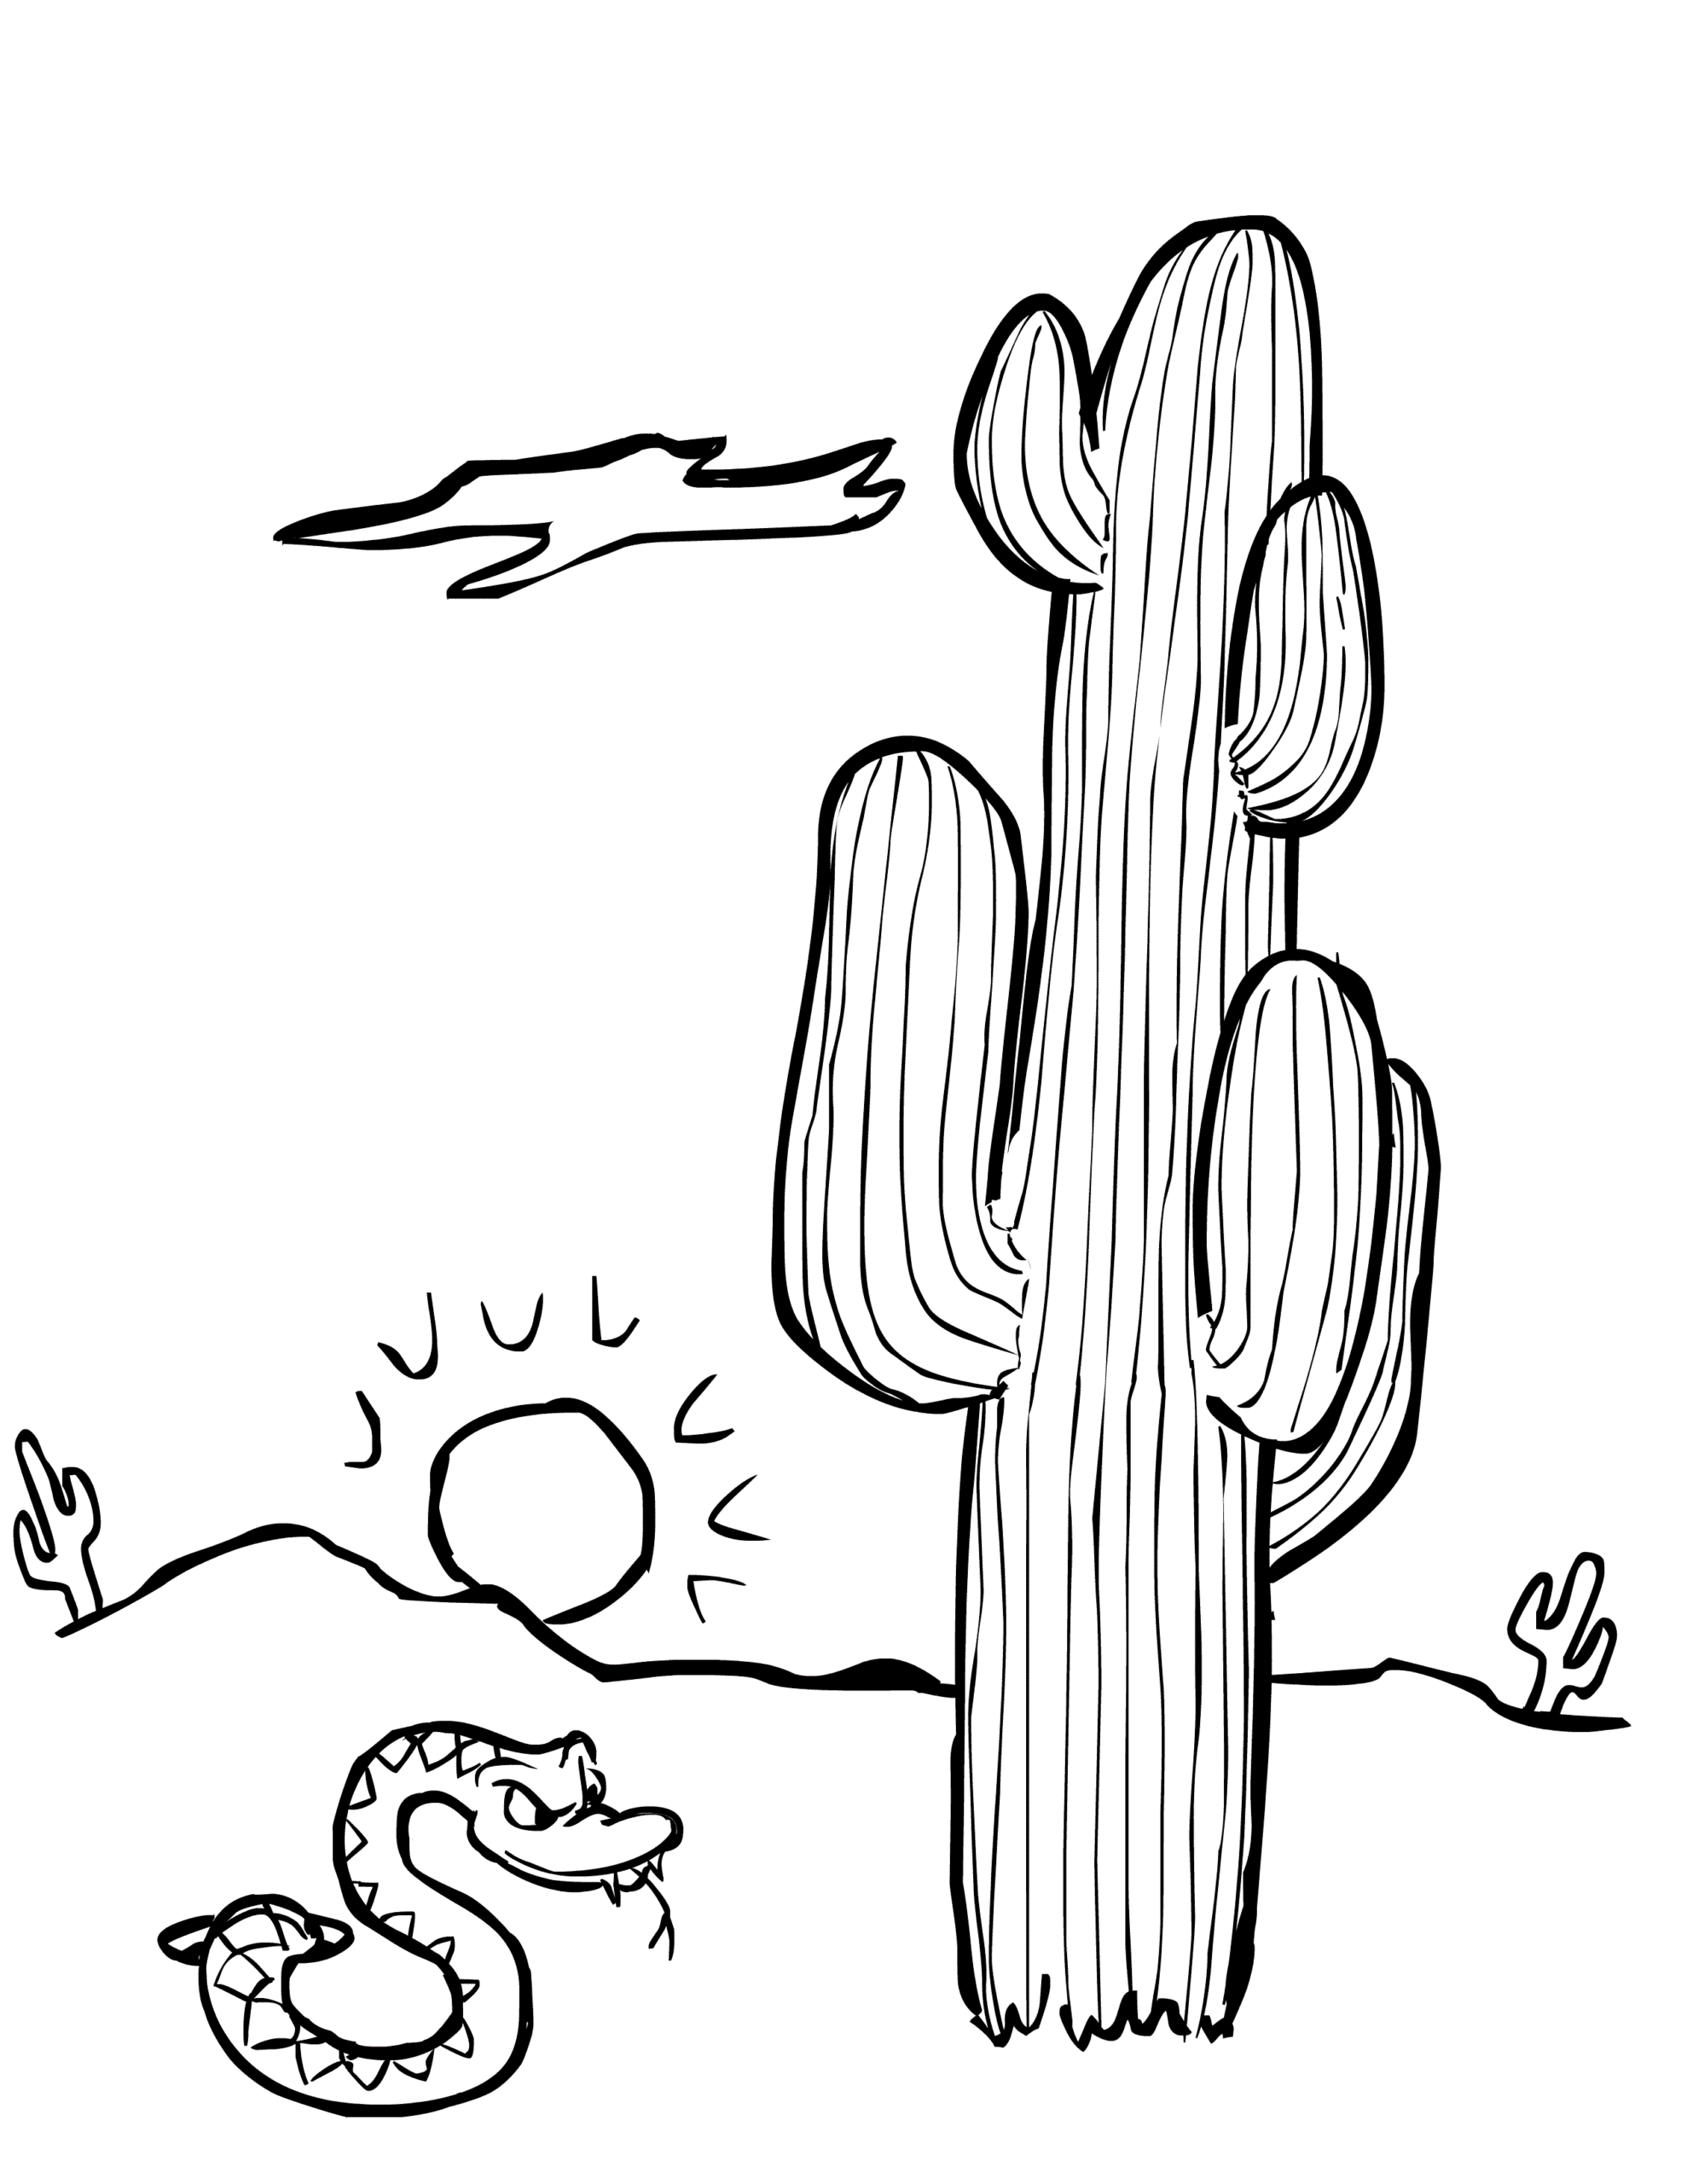 Cactus Coloring Pages Flowers Nature Cactus Printable 2021 033 Coloring4free